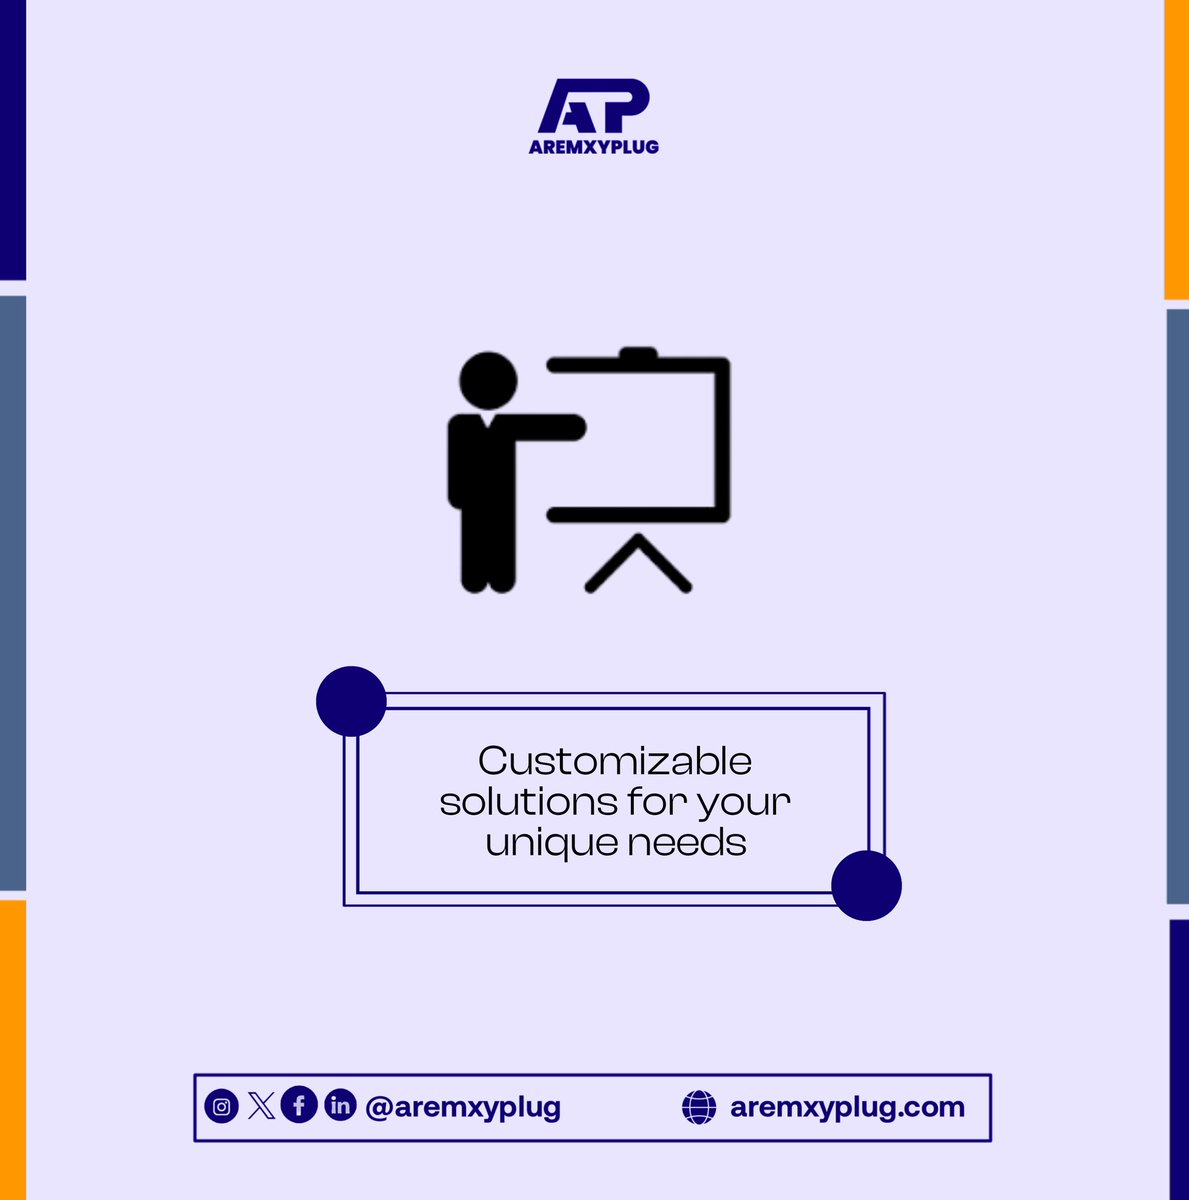 Discover the AremxyPlug digital toolbox, where your business's potential is unleashed. Customizable solutions for your unique needs. 
💼🧰 

#DigitalToolbox #CustomSolutions
#AremxyPlug